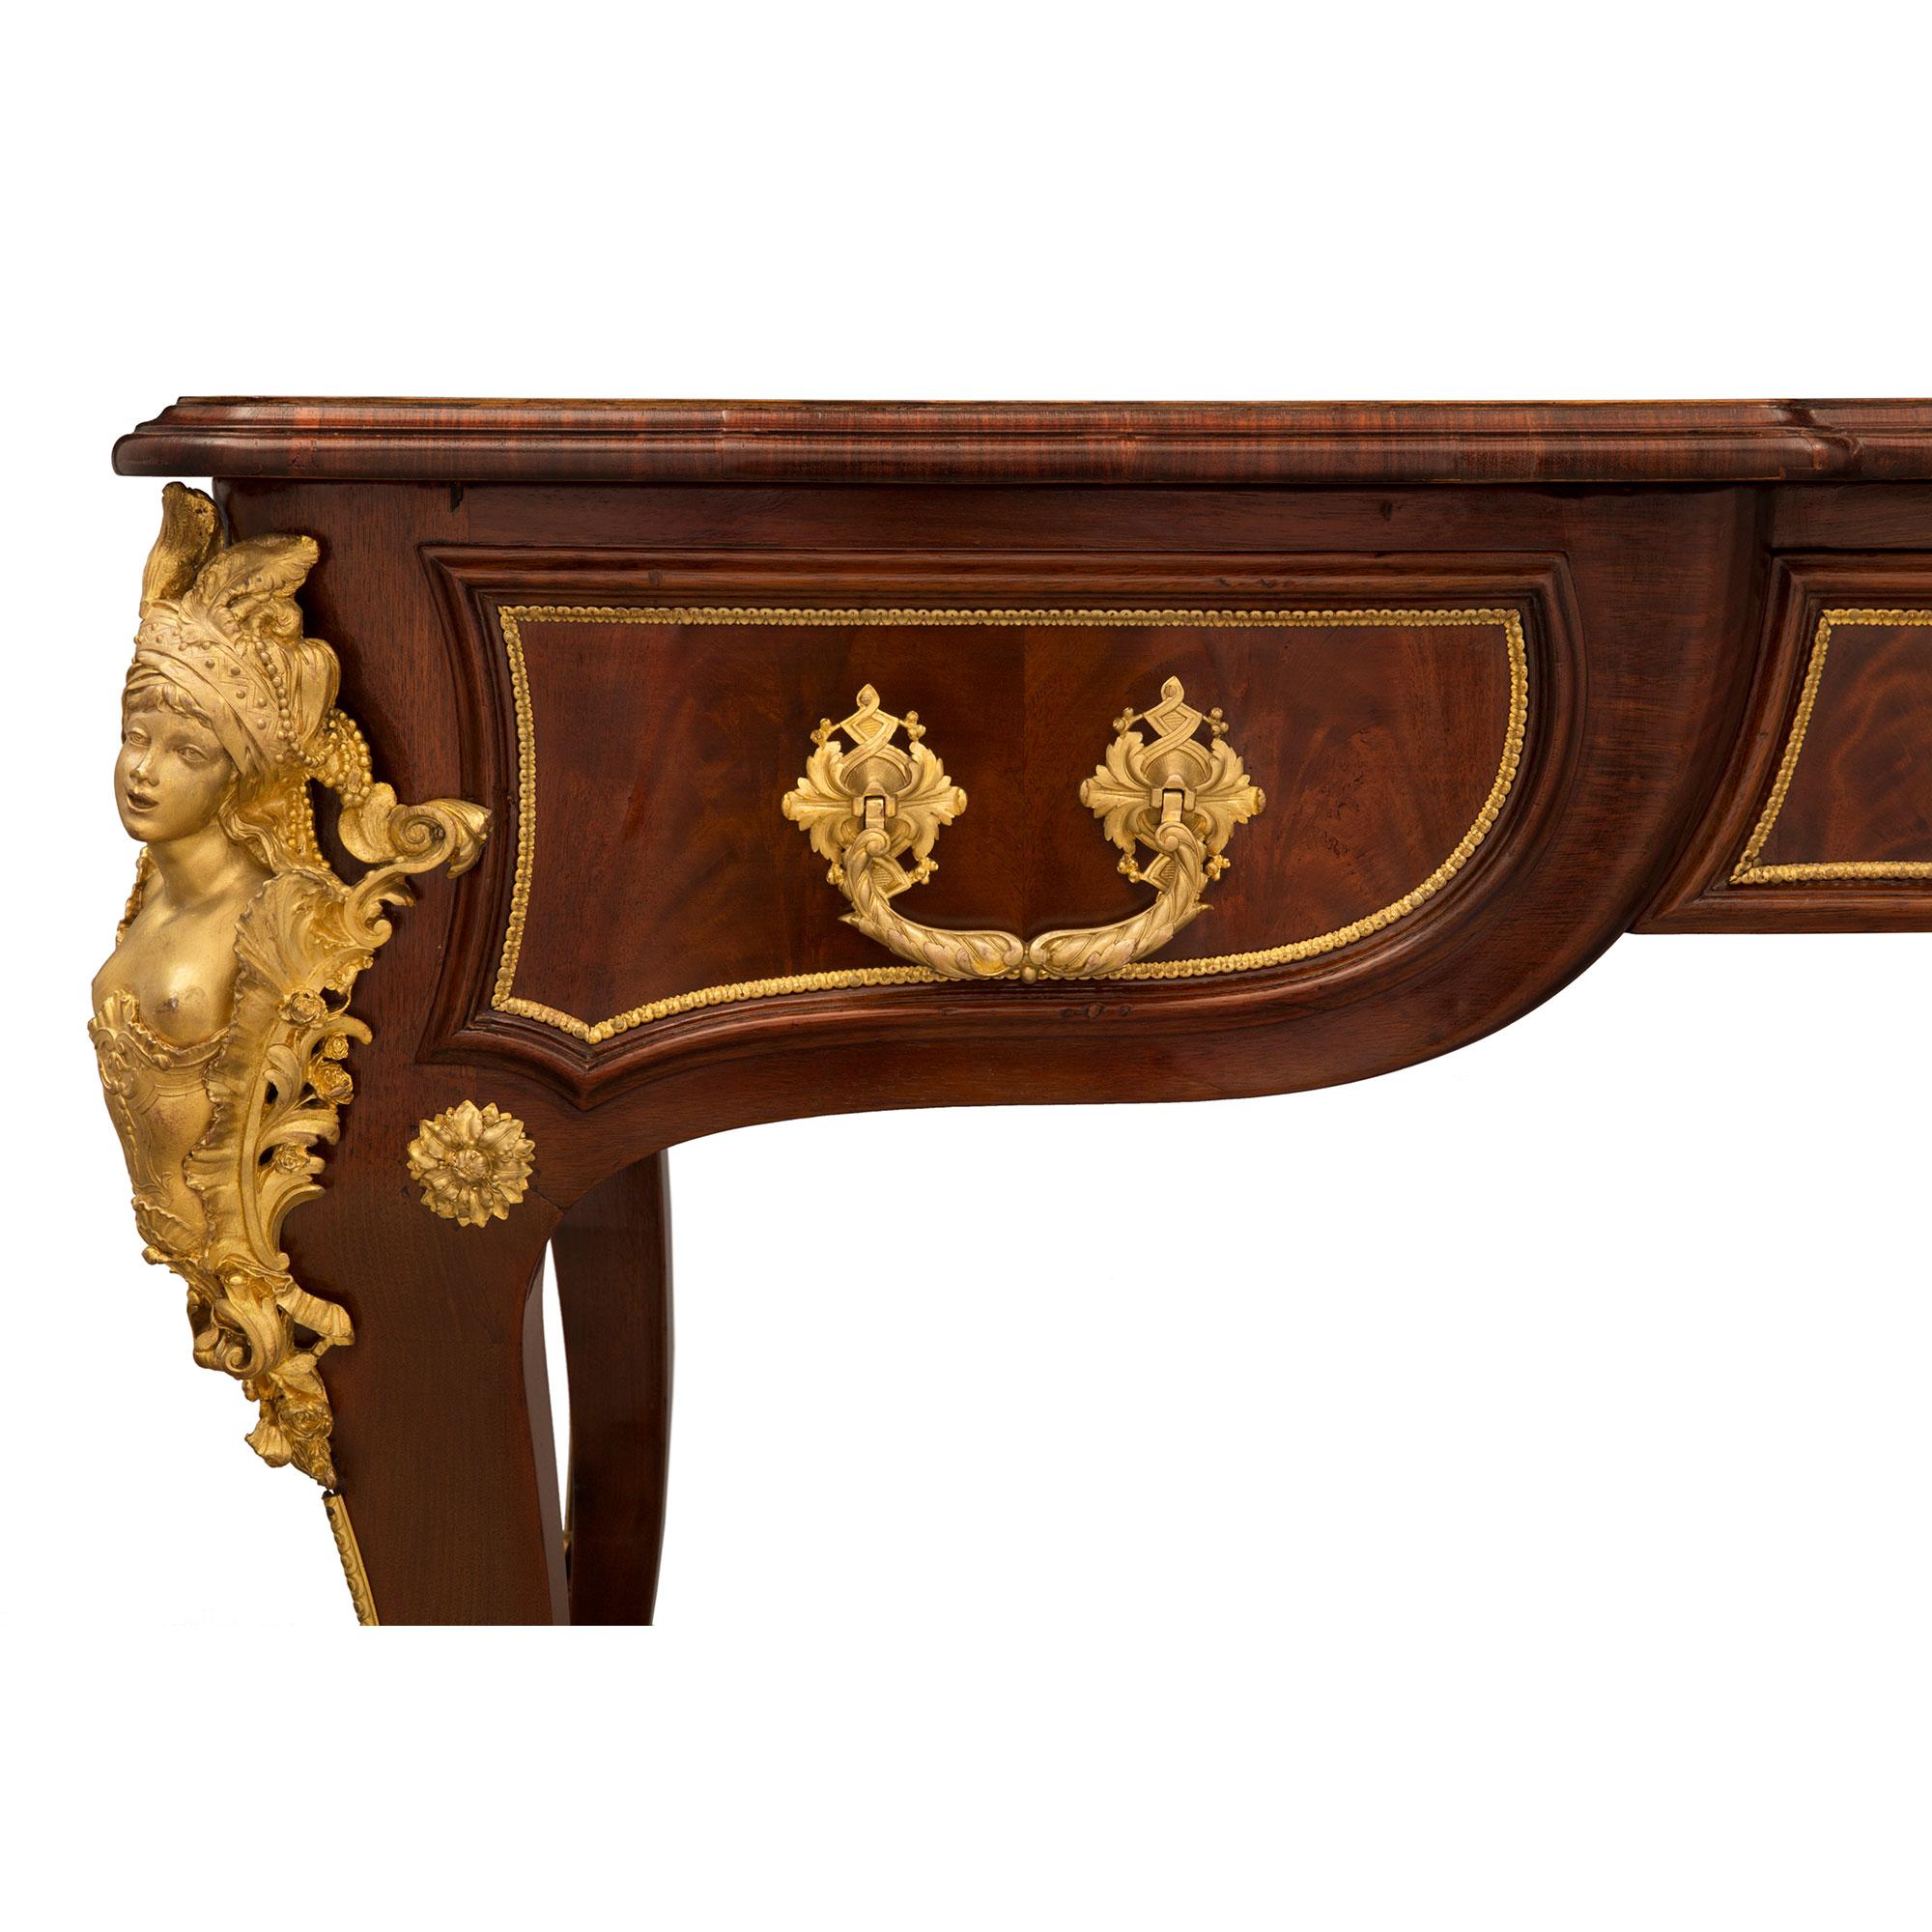 French 19th Century Louis XV Style Flamed Mahogany and Ormolu Bureau Plat Desk For Sale 4